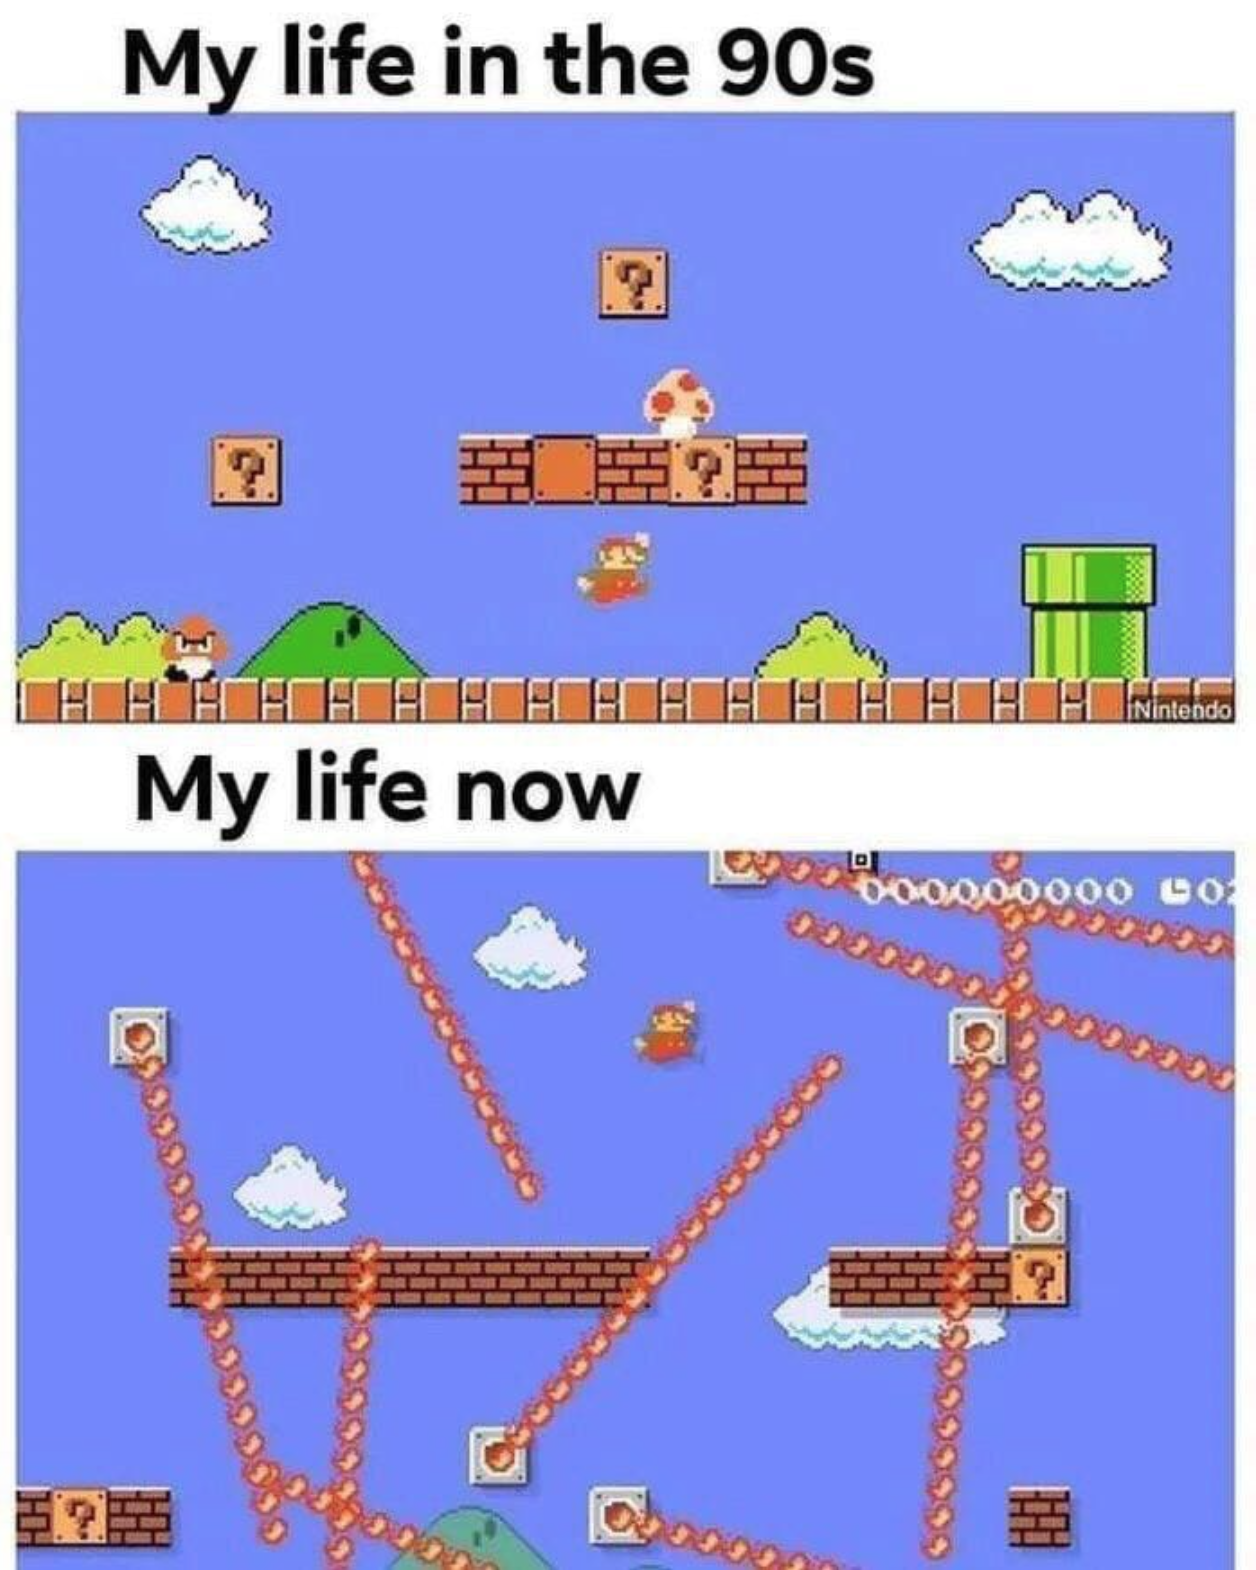 gaming memes -  90s life meme - My life in the 90s INintendo My life now 000000 00 Hr